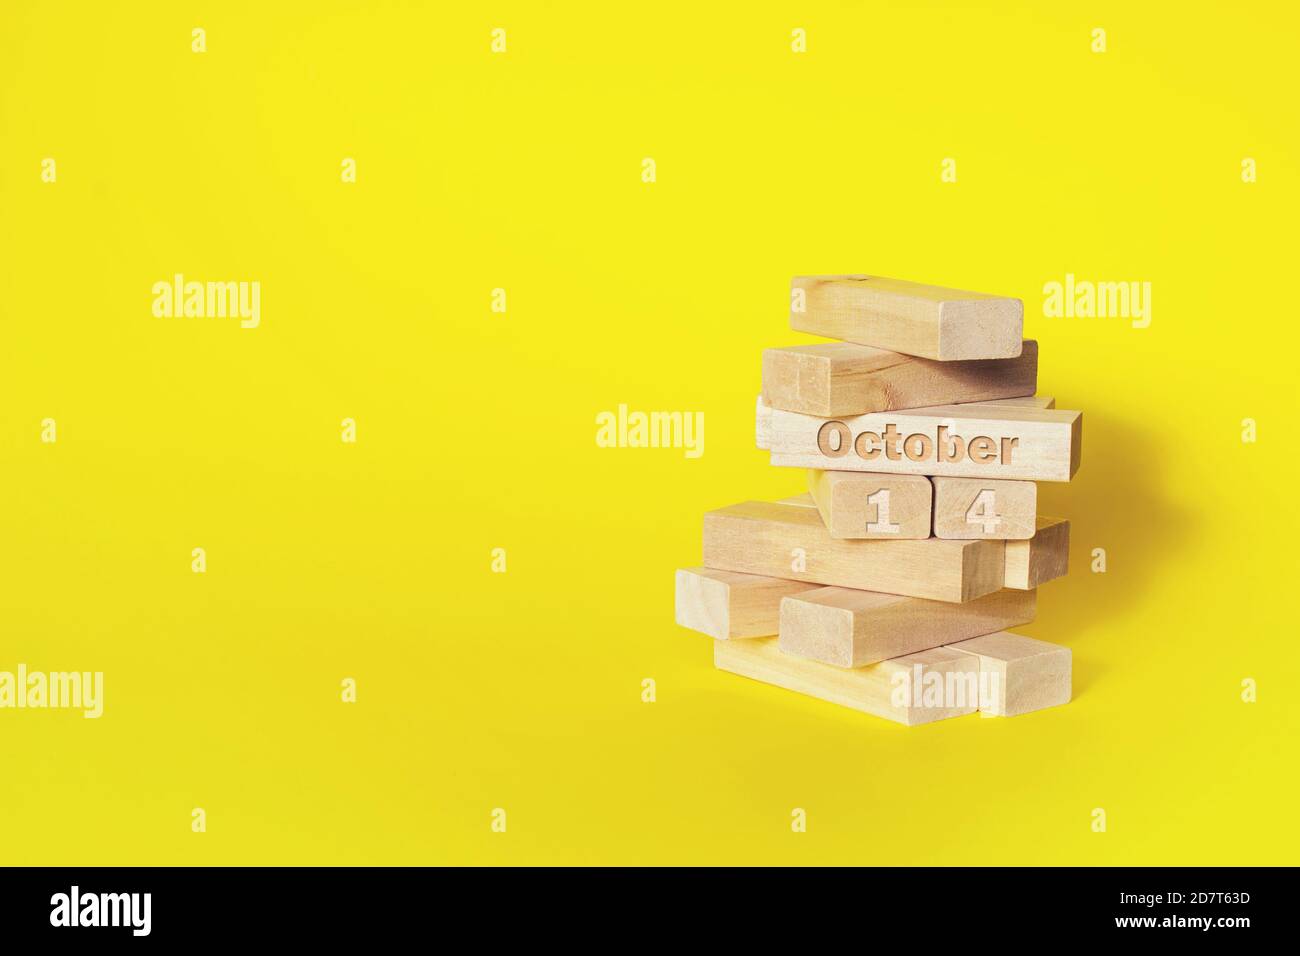 October 14th. Day 14 of month, Calendar date. Wooden blocks folded into ...